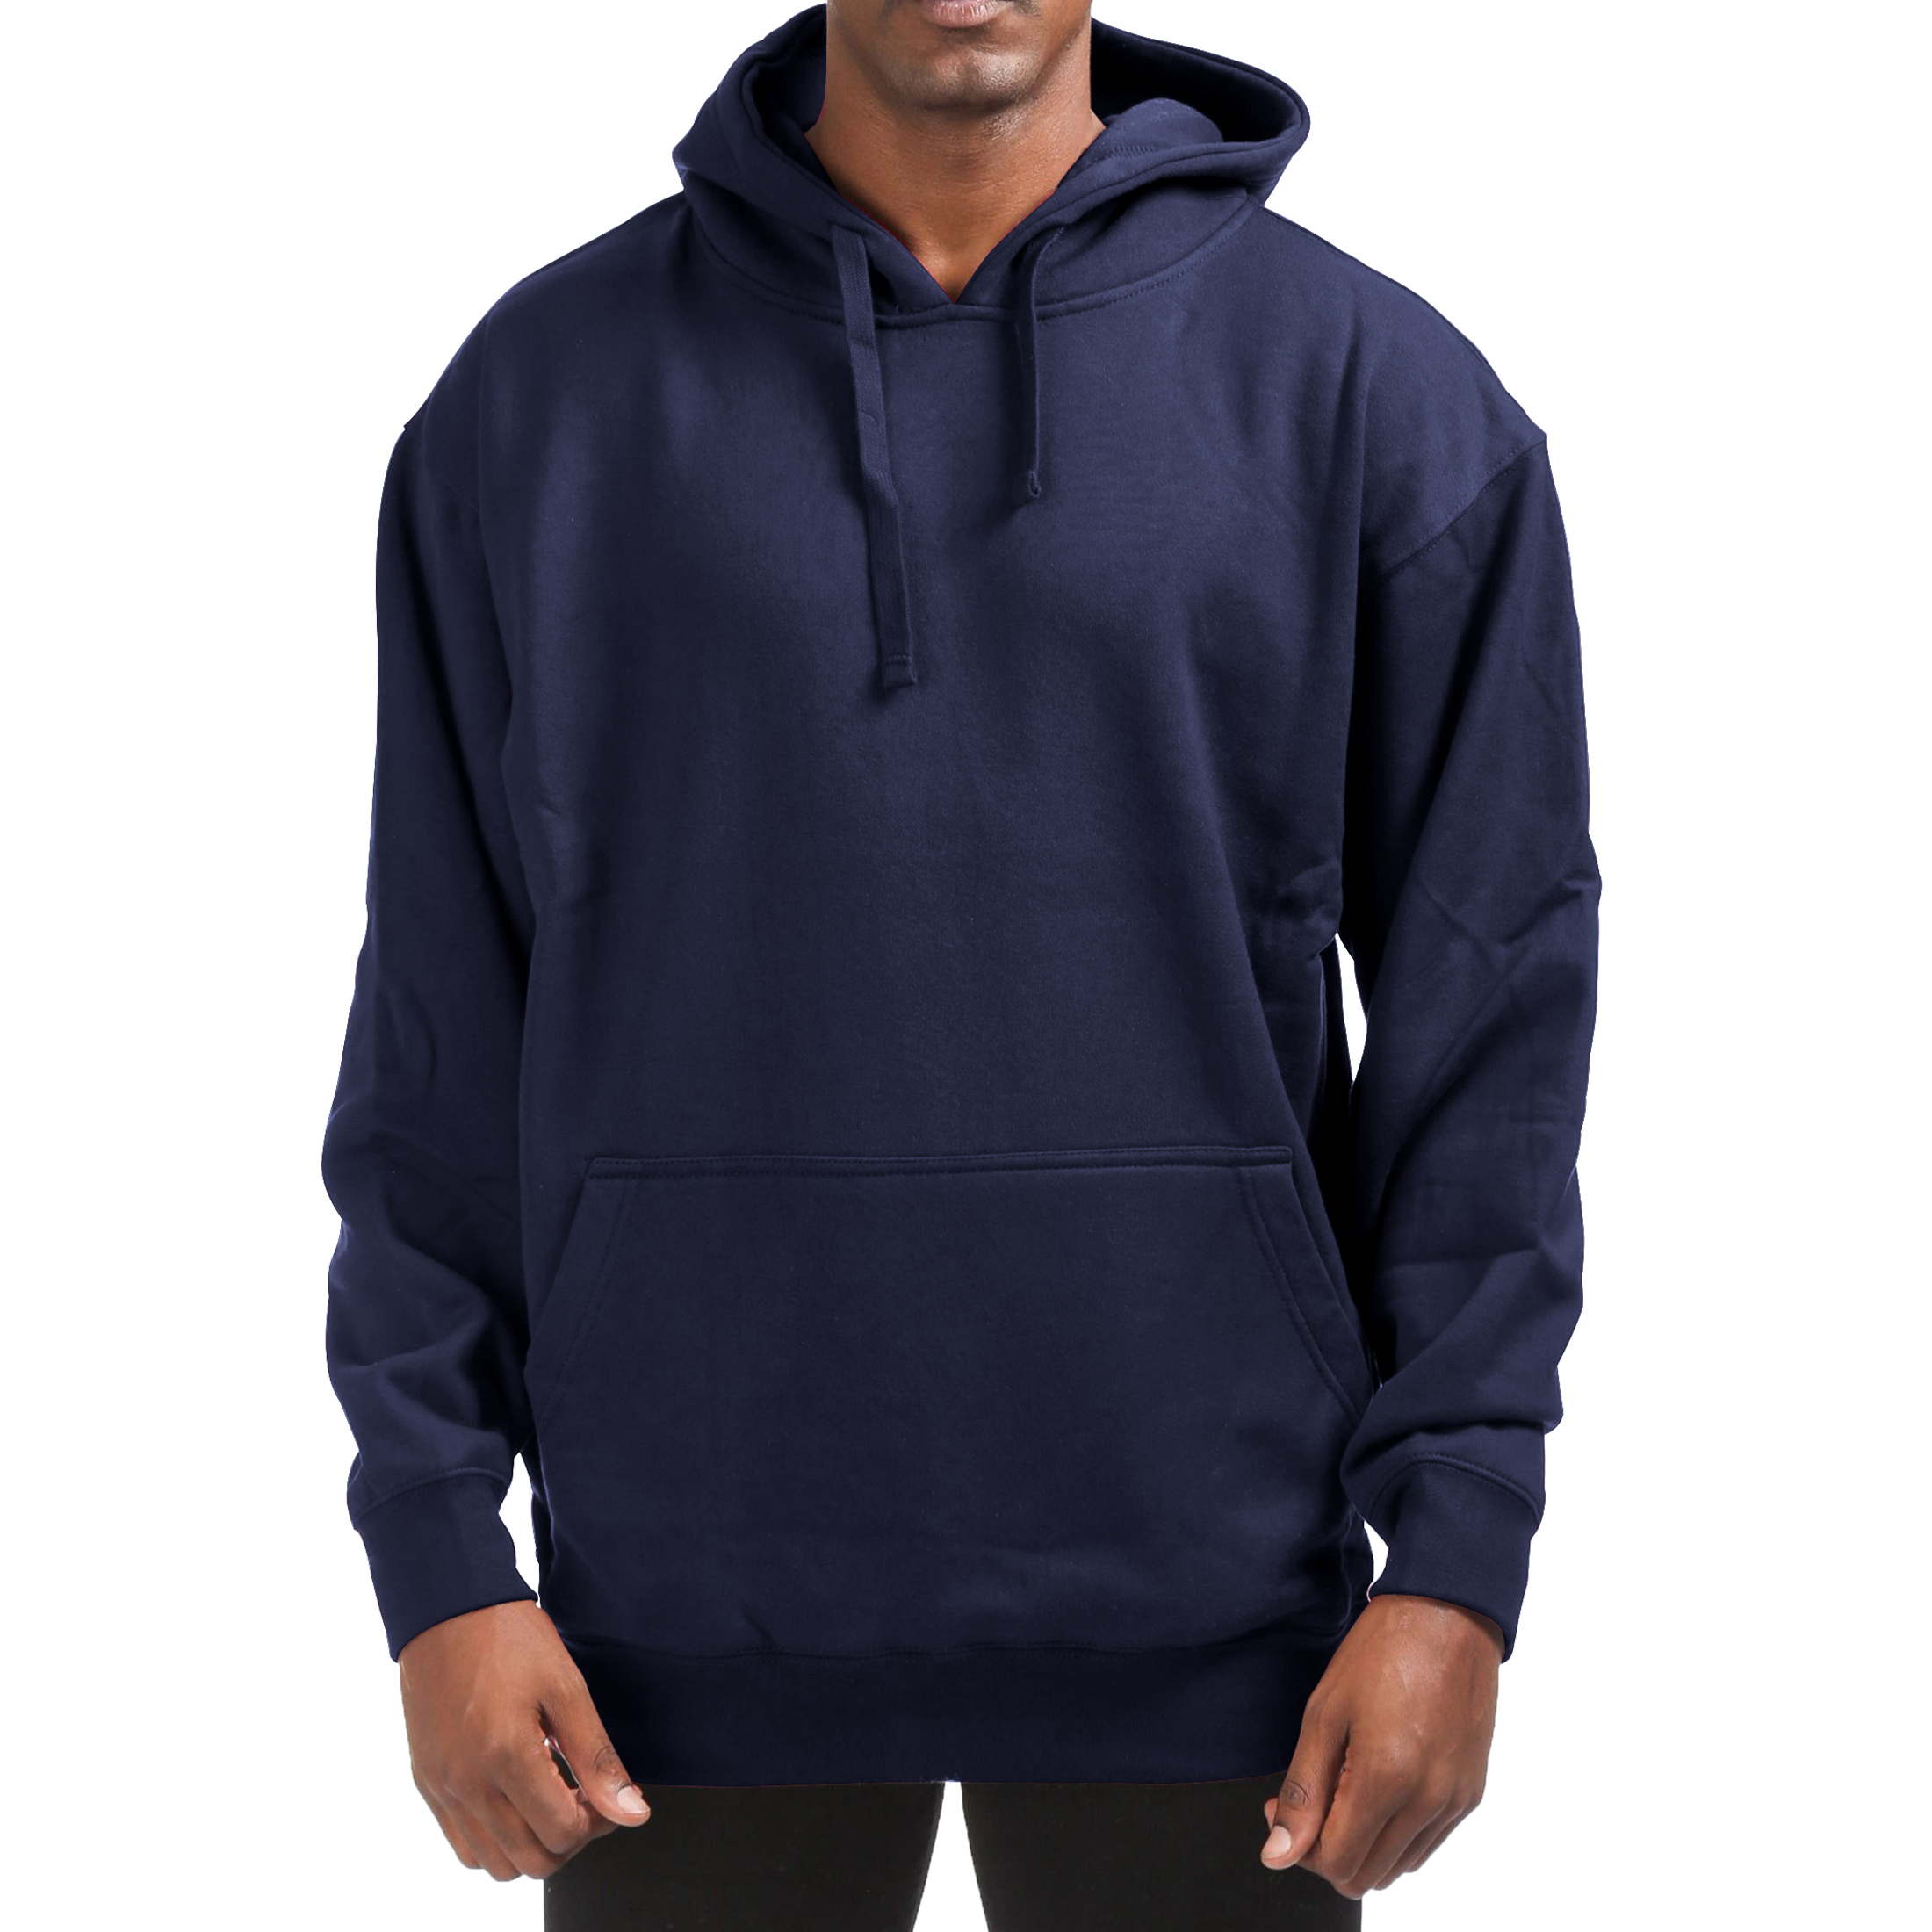 Men's Cotton-Blend Fleece Pullover Hoodie With Pocket (Big & Tall Sizes Available) - Navy, Small